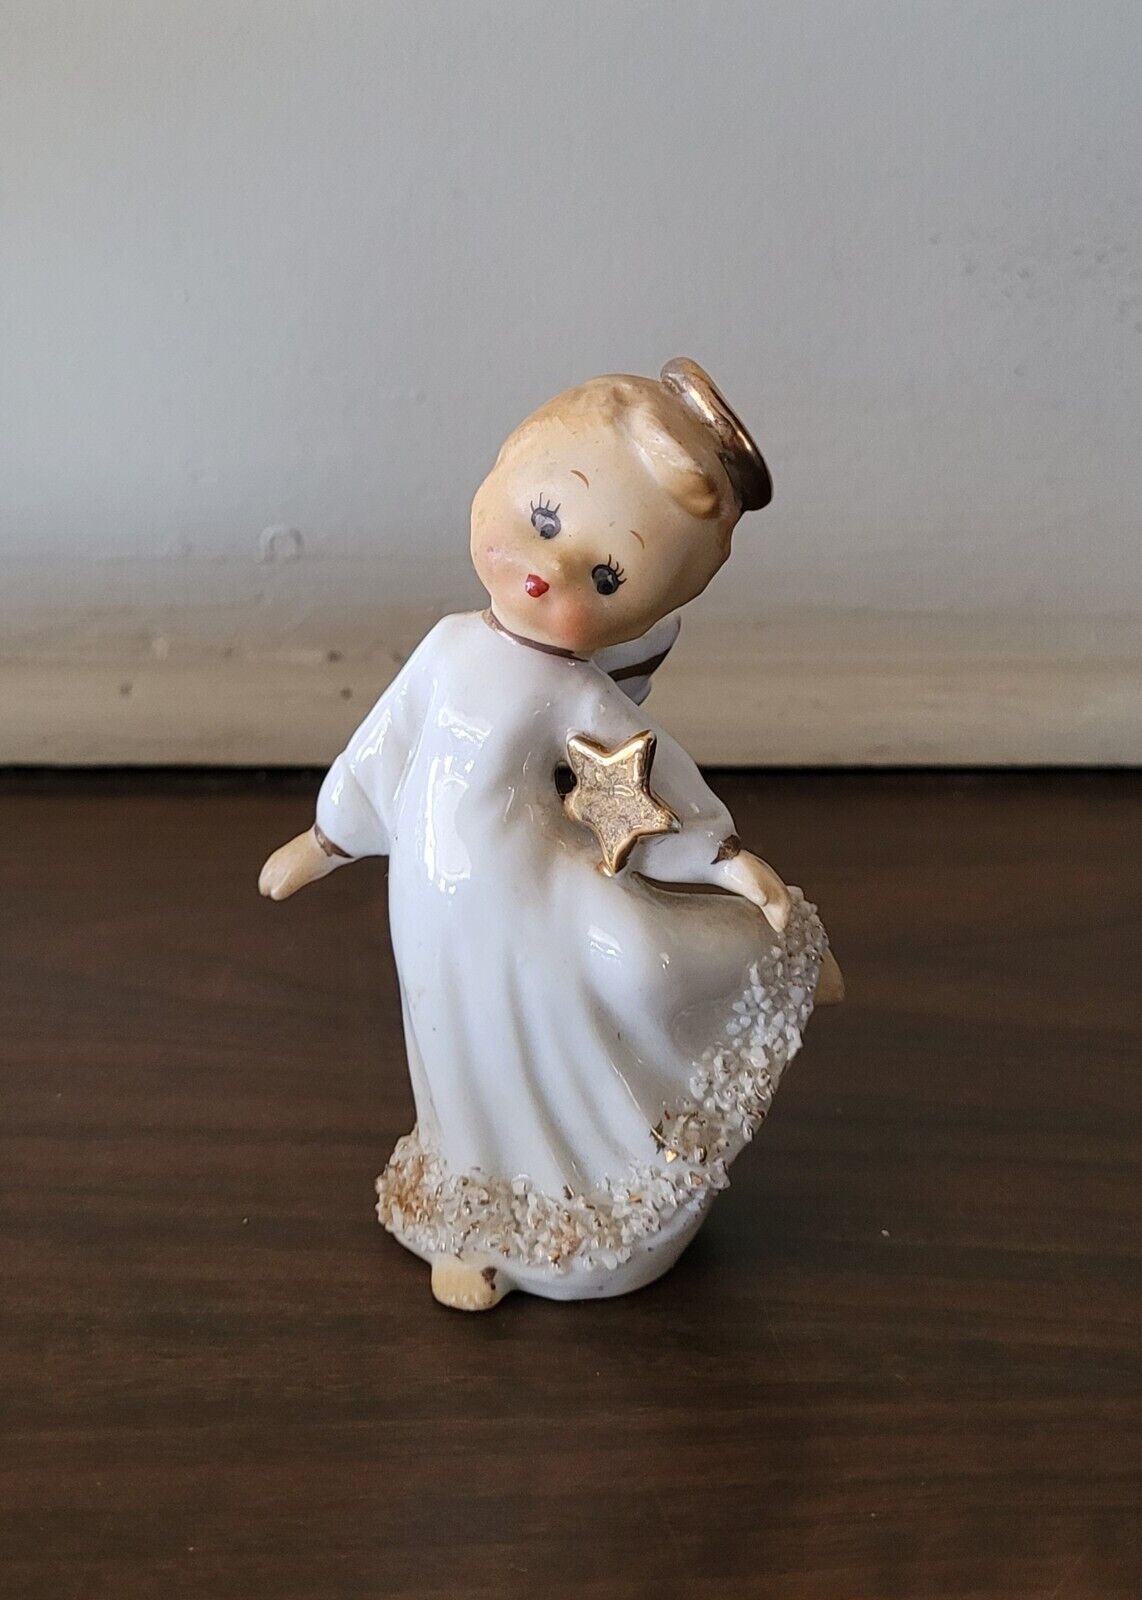 SALE 32% OFF Vintage Handpainted Chase Japan Dancing Angel with Star 3.75